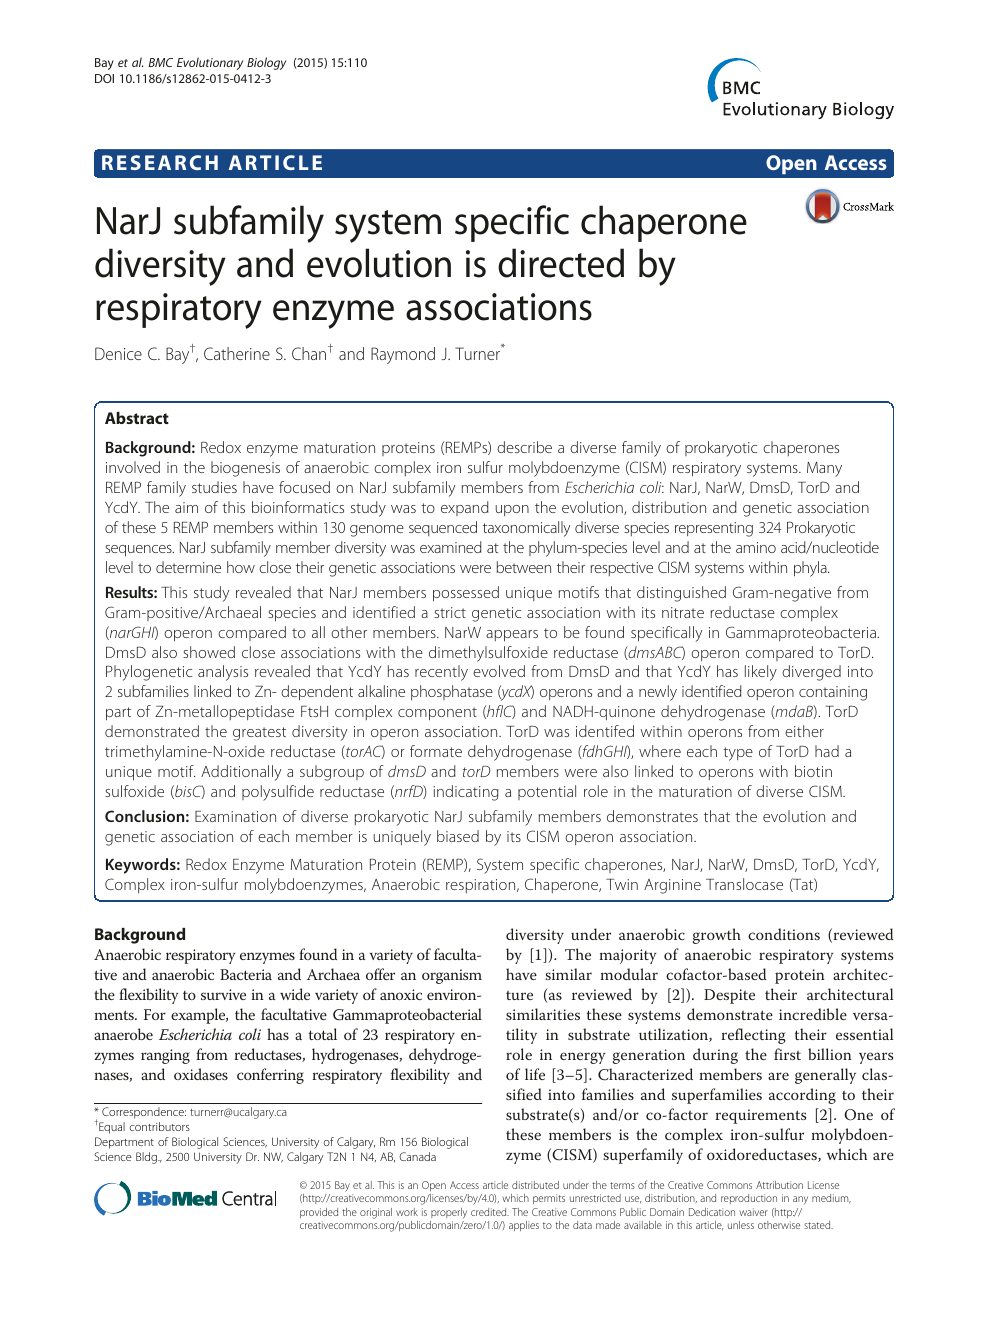 Narj Subfamily System Specific Chaperone Diversity And Evolution Is Directed By Respiratory Enzyme Associations Topic Of Research Paper In Biological Sciences Download Scholarly Article Pdf And Read For Free On Cyberleninka